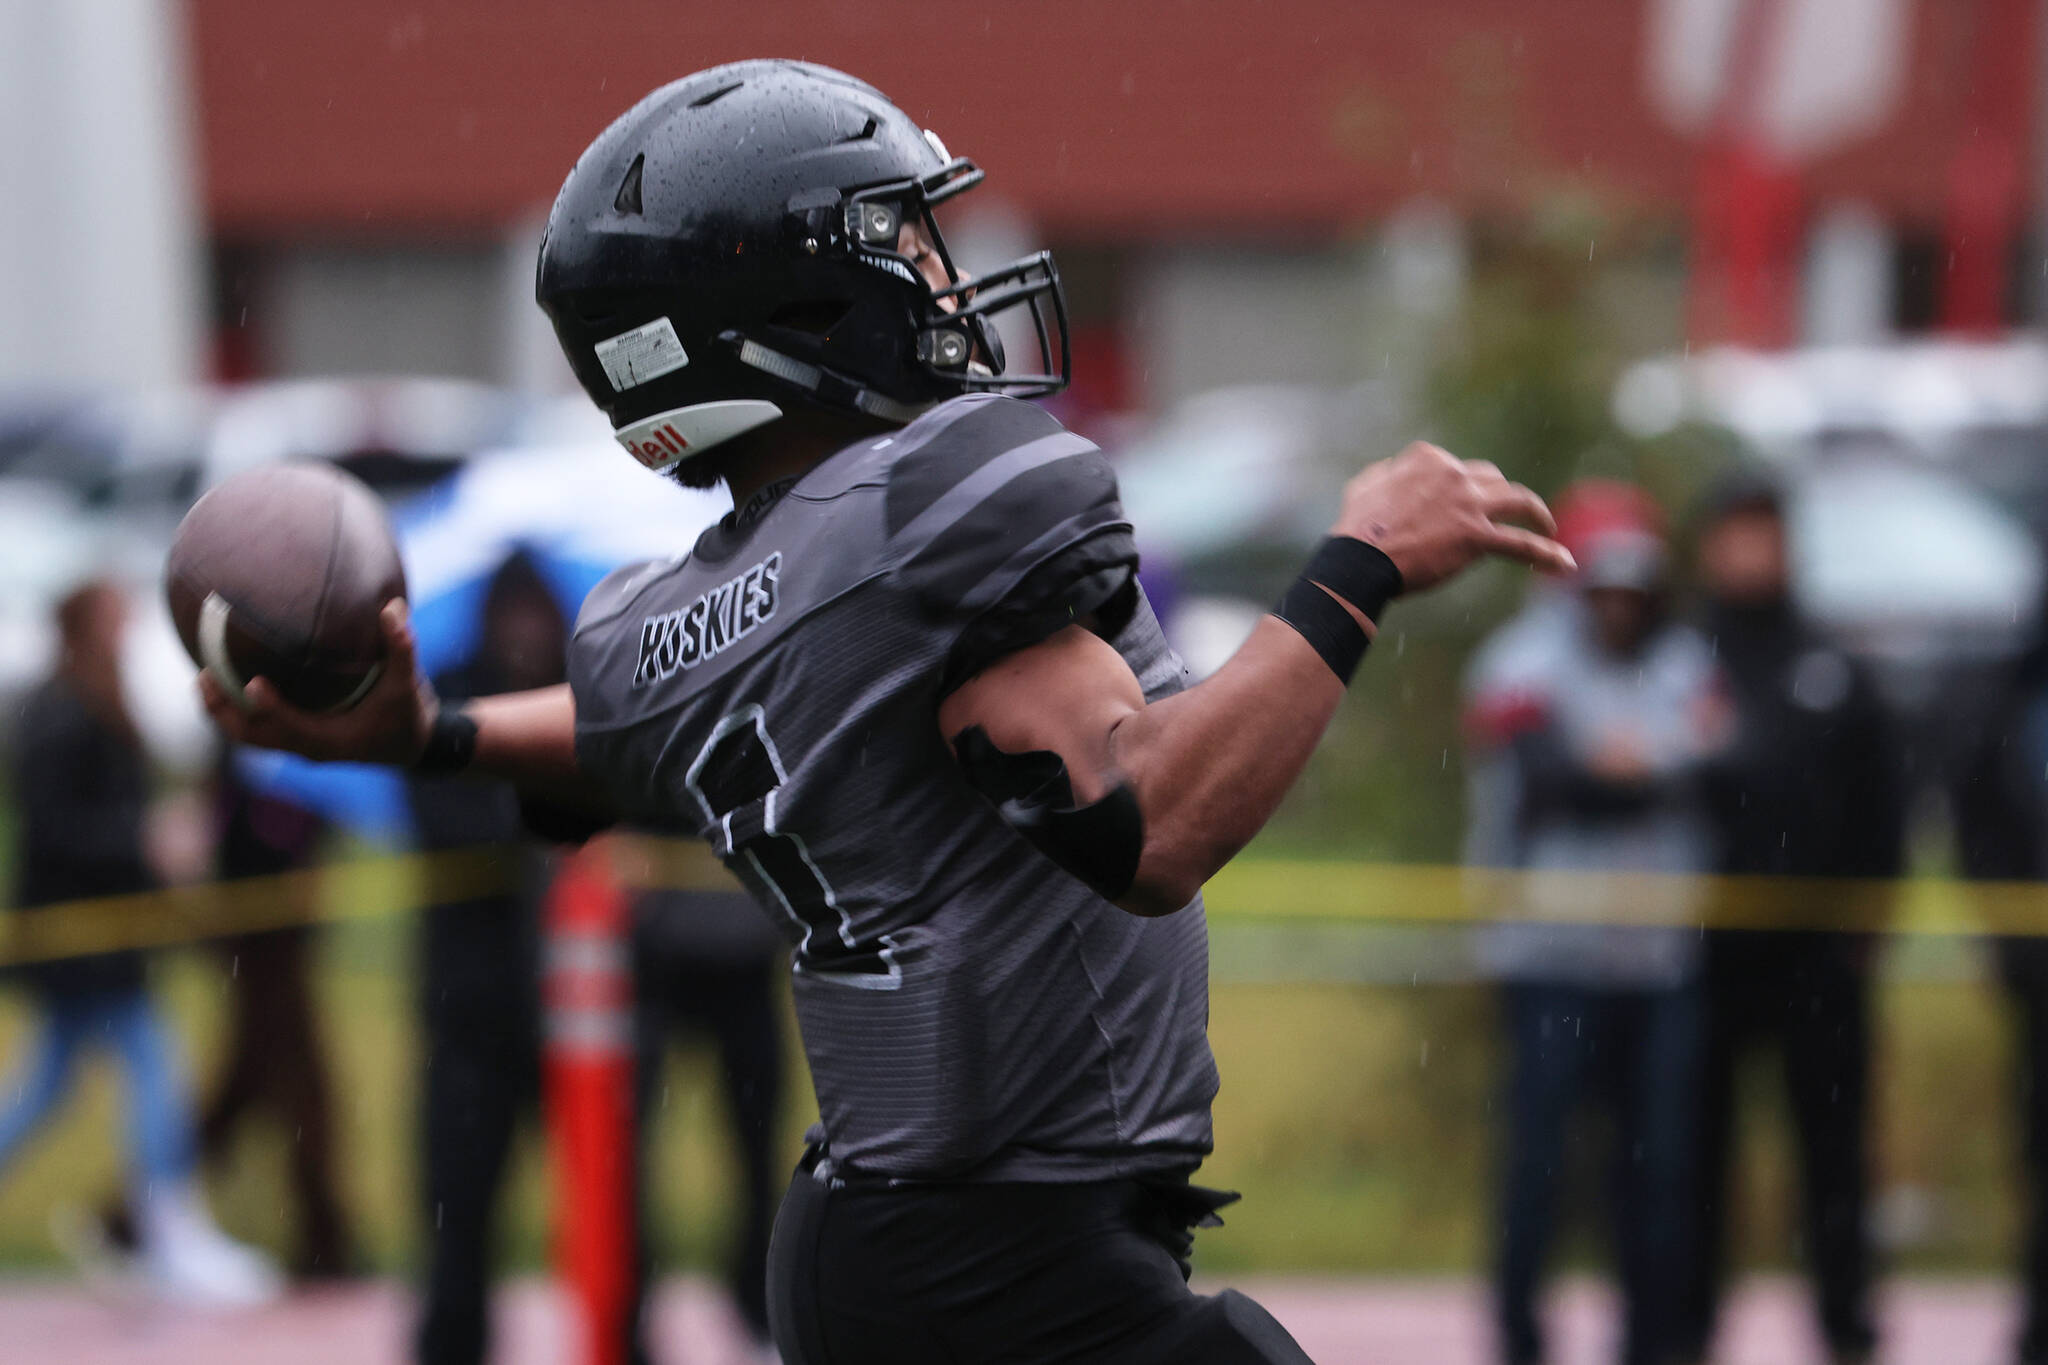 Jarrell Williams winds up for a long throw. Williams could be a difference-maker for Juneau in the state championship game. (Ben Hohenstatt / Juneau Empire)